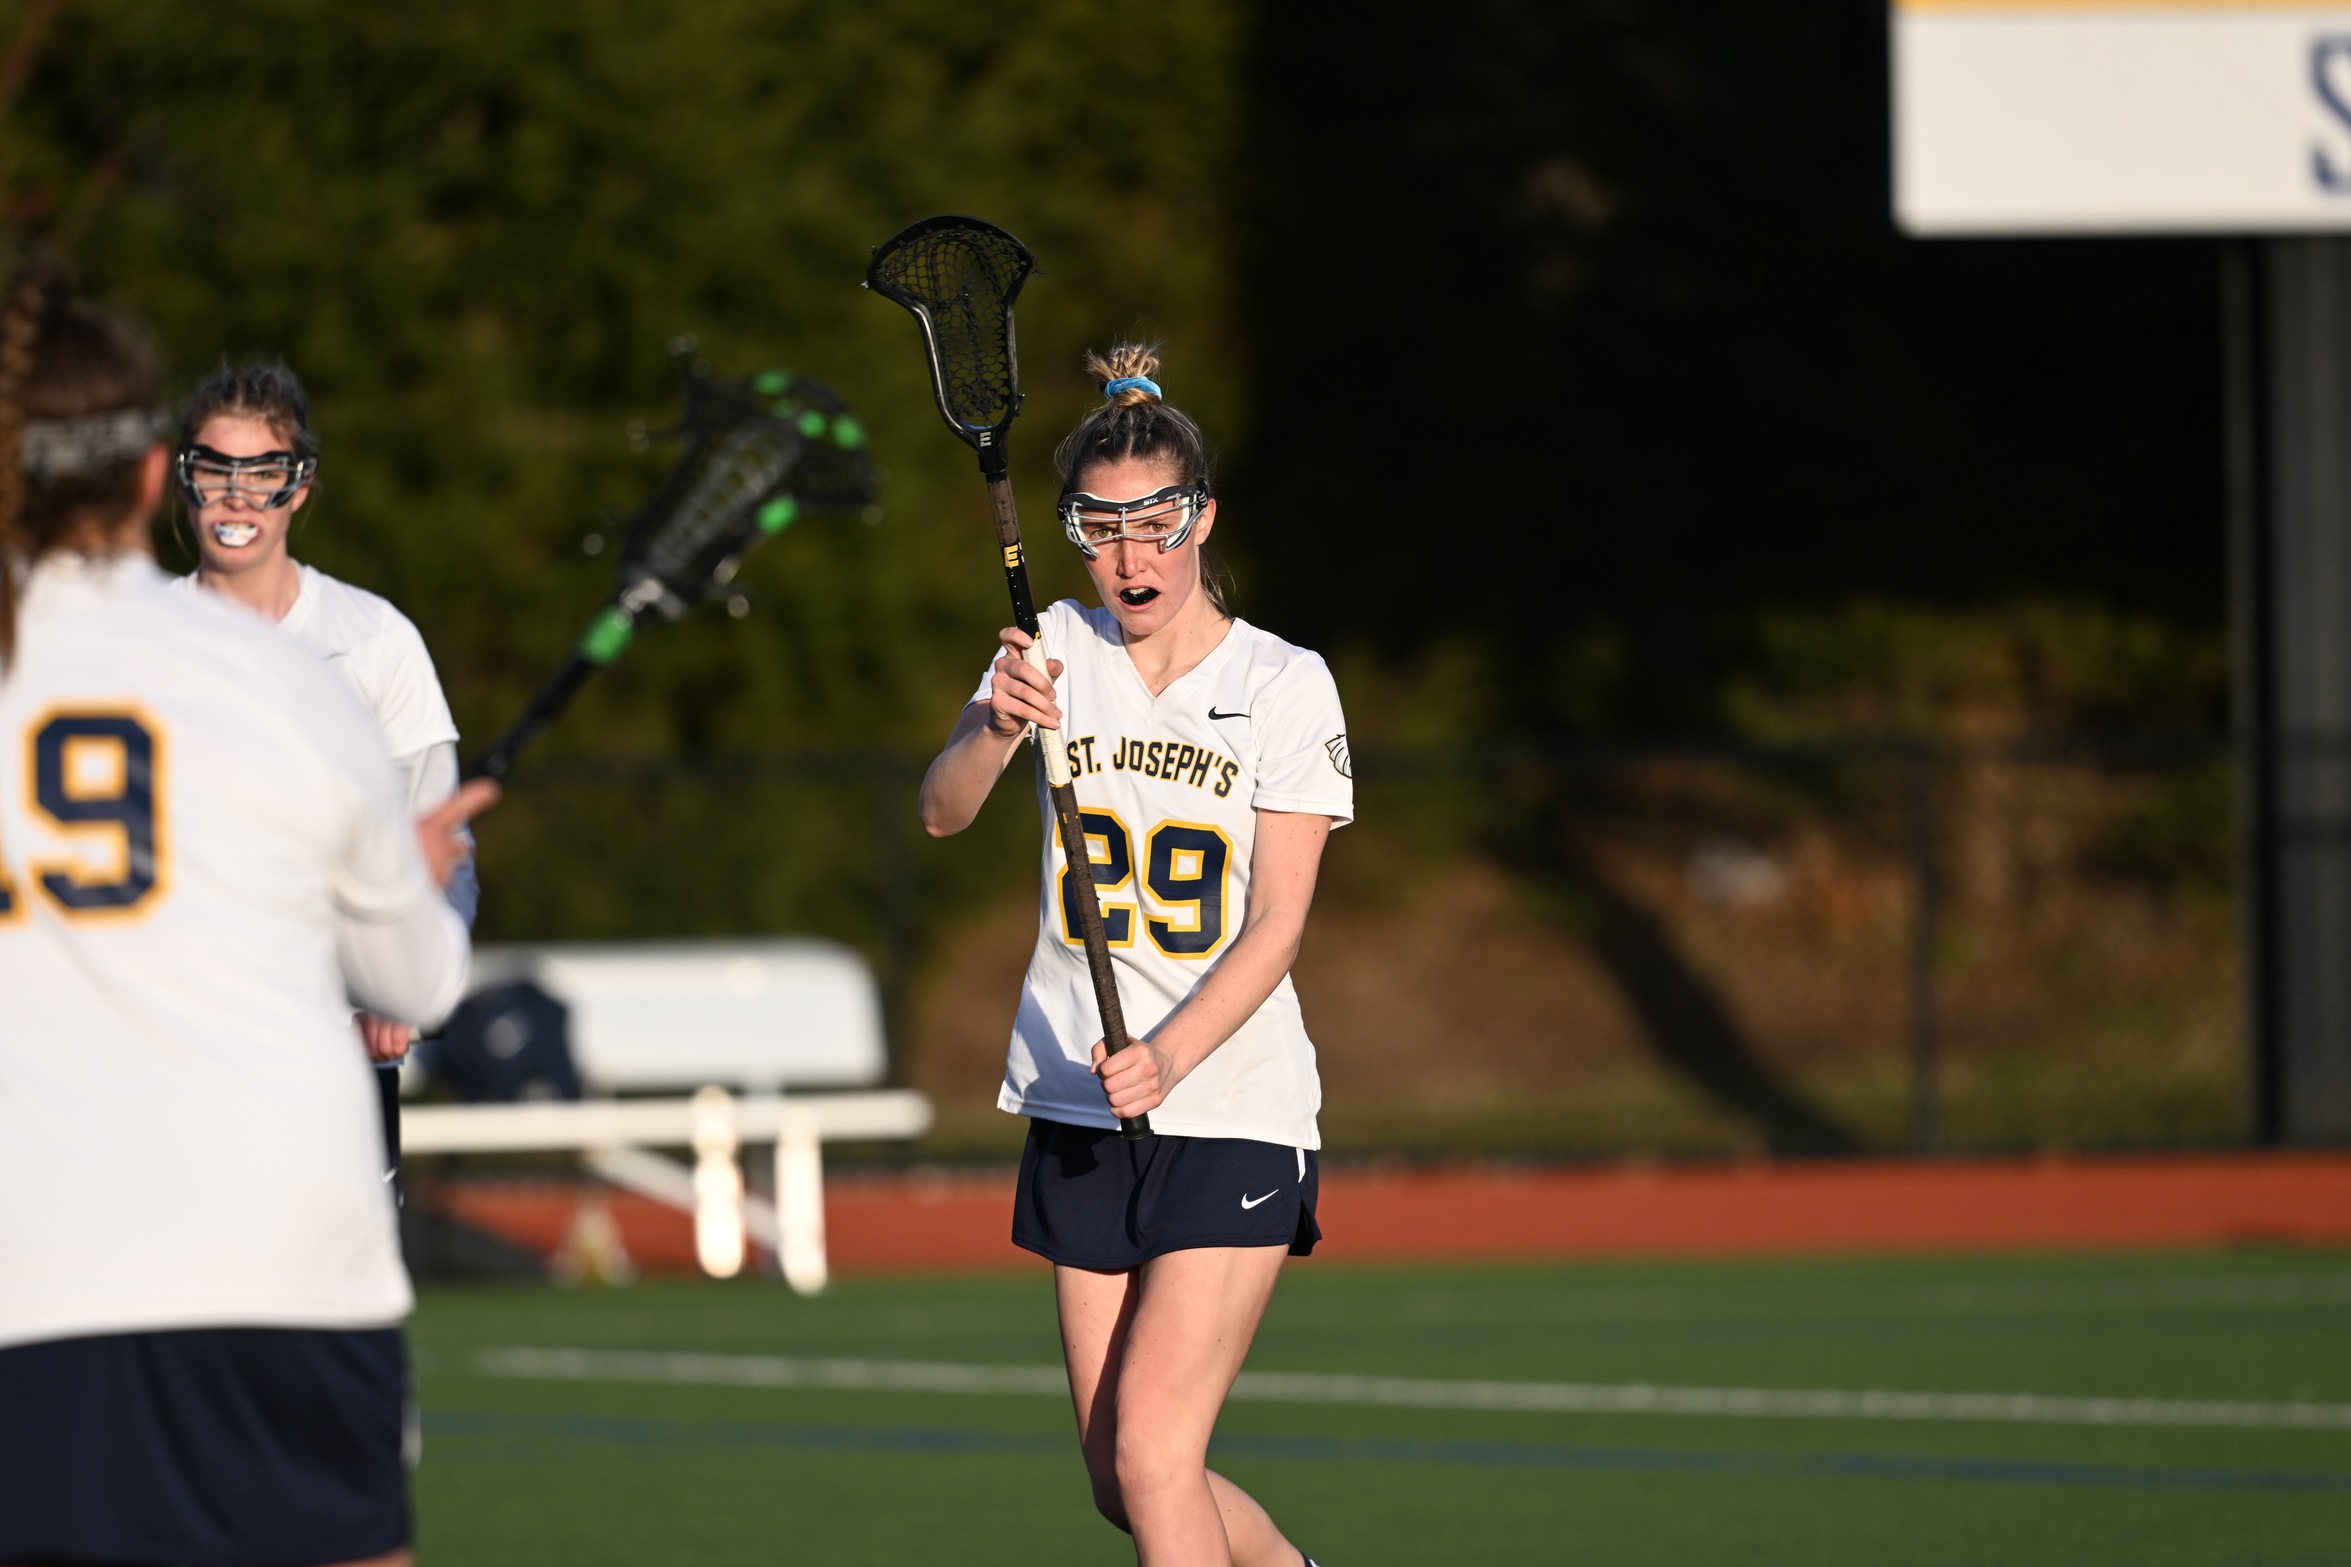 Women's Lacrosse Secures First Victory Against Ramapo, 14-8